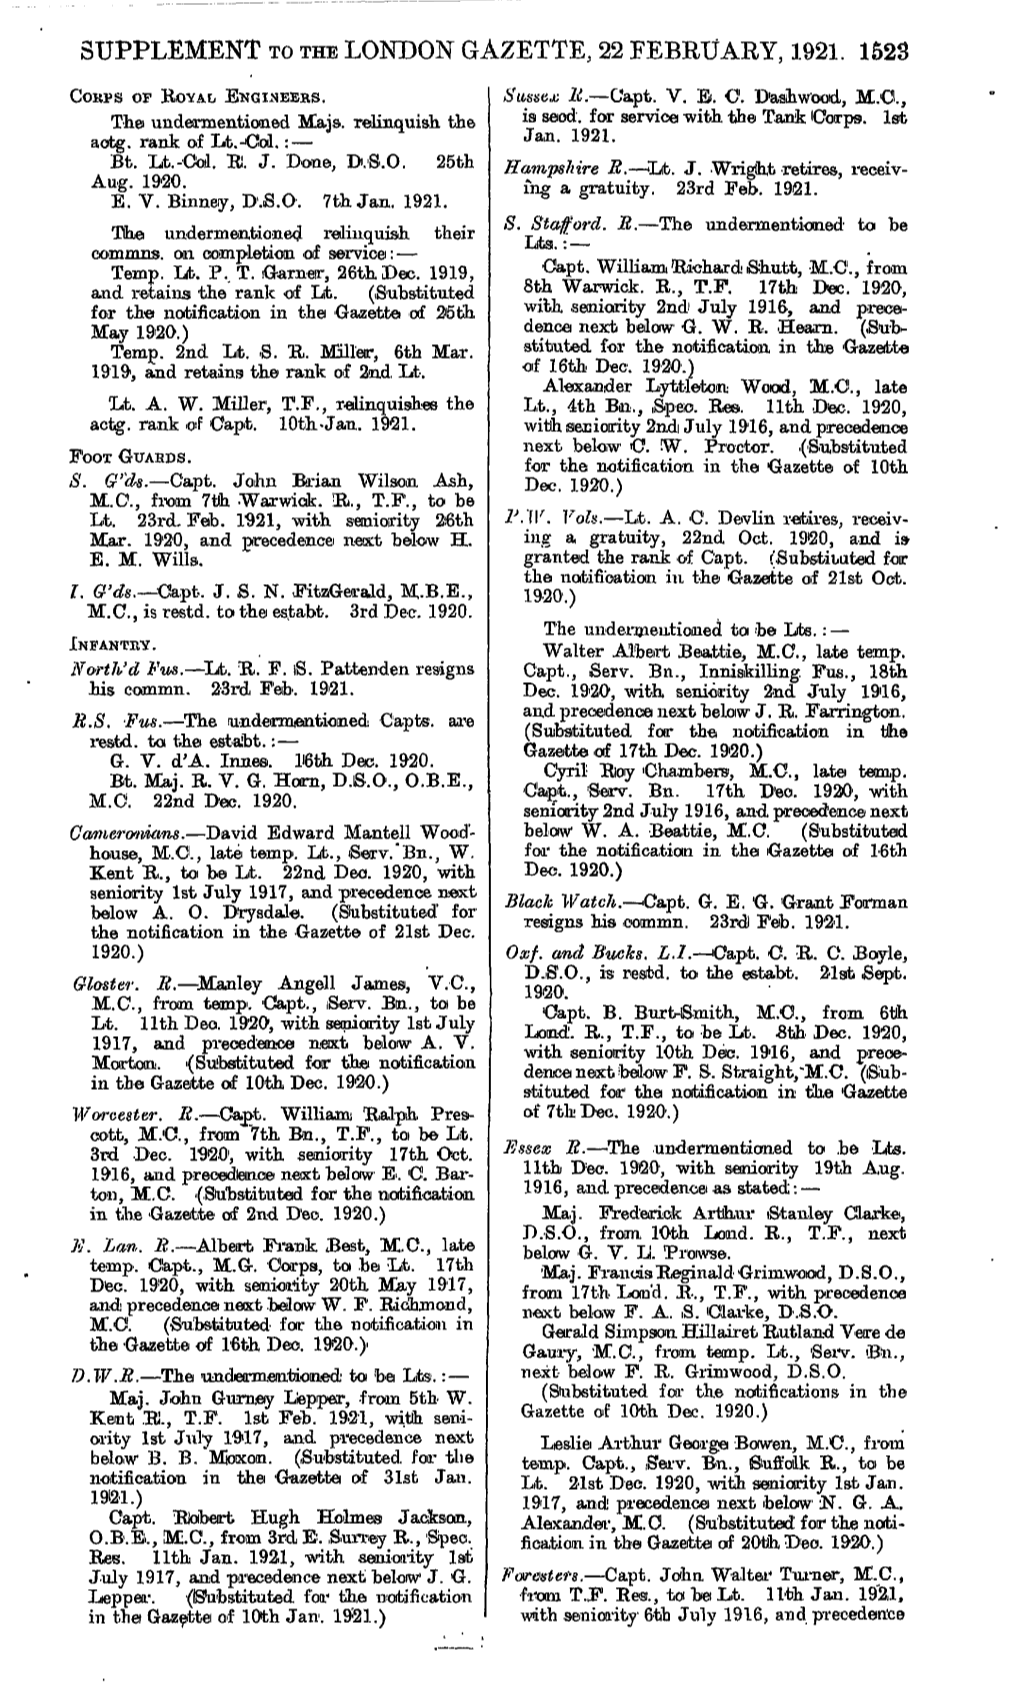 Supplement to the London Gazette, 22 February, 1921